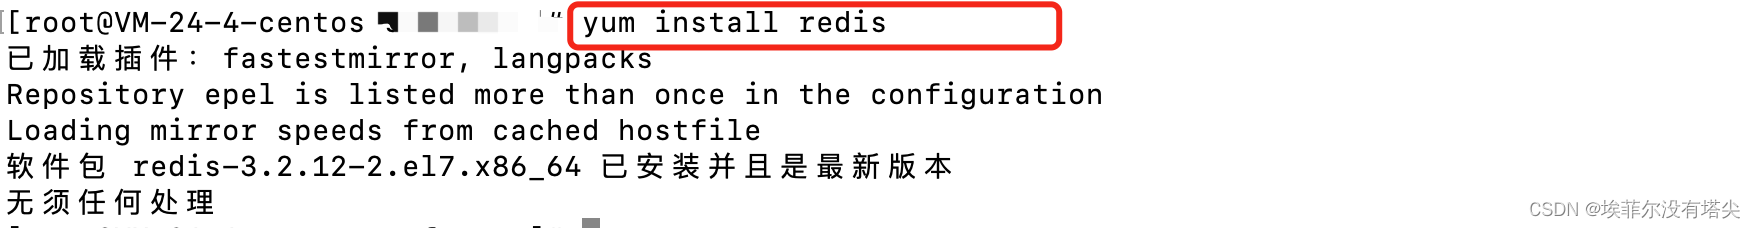 <span style='color:red;'>centos</span><span style='color:red;'>7</span> linux下yum<span style='color:red;'>安装</span><span style='color:red;'>redis</span>